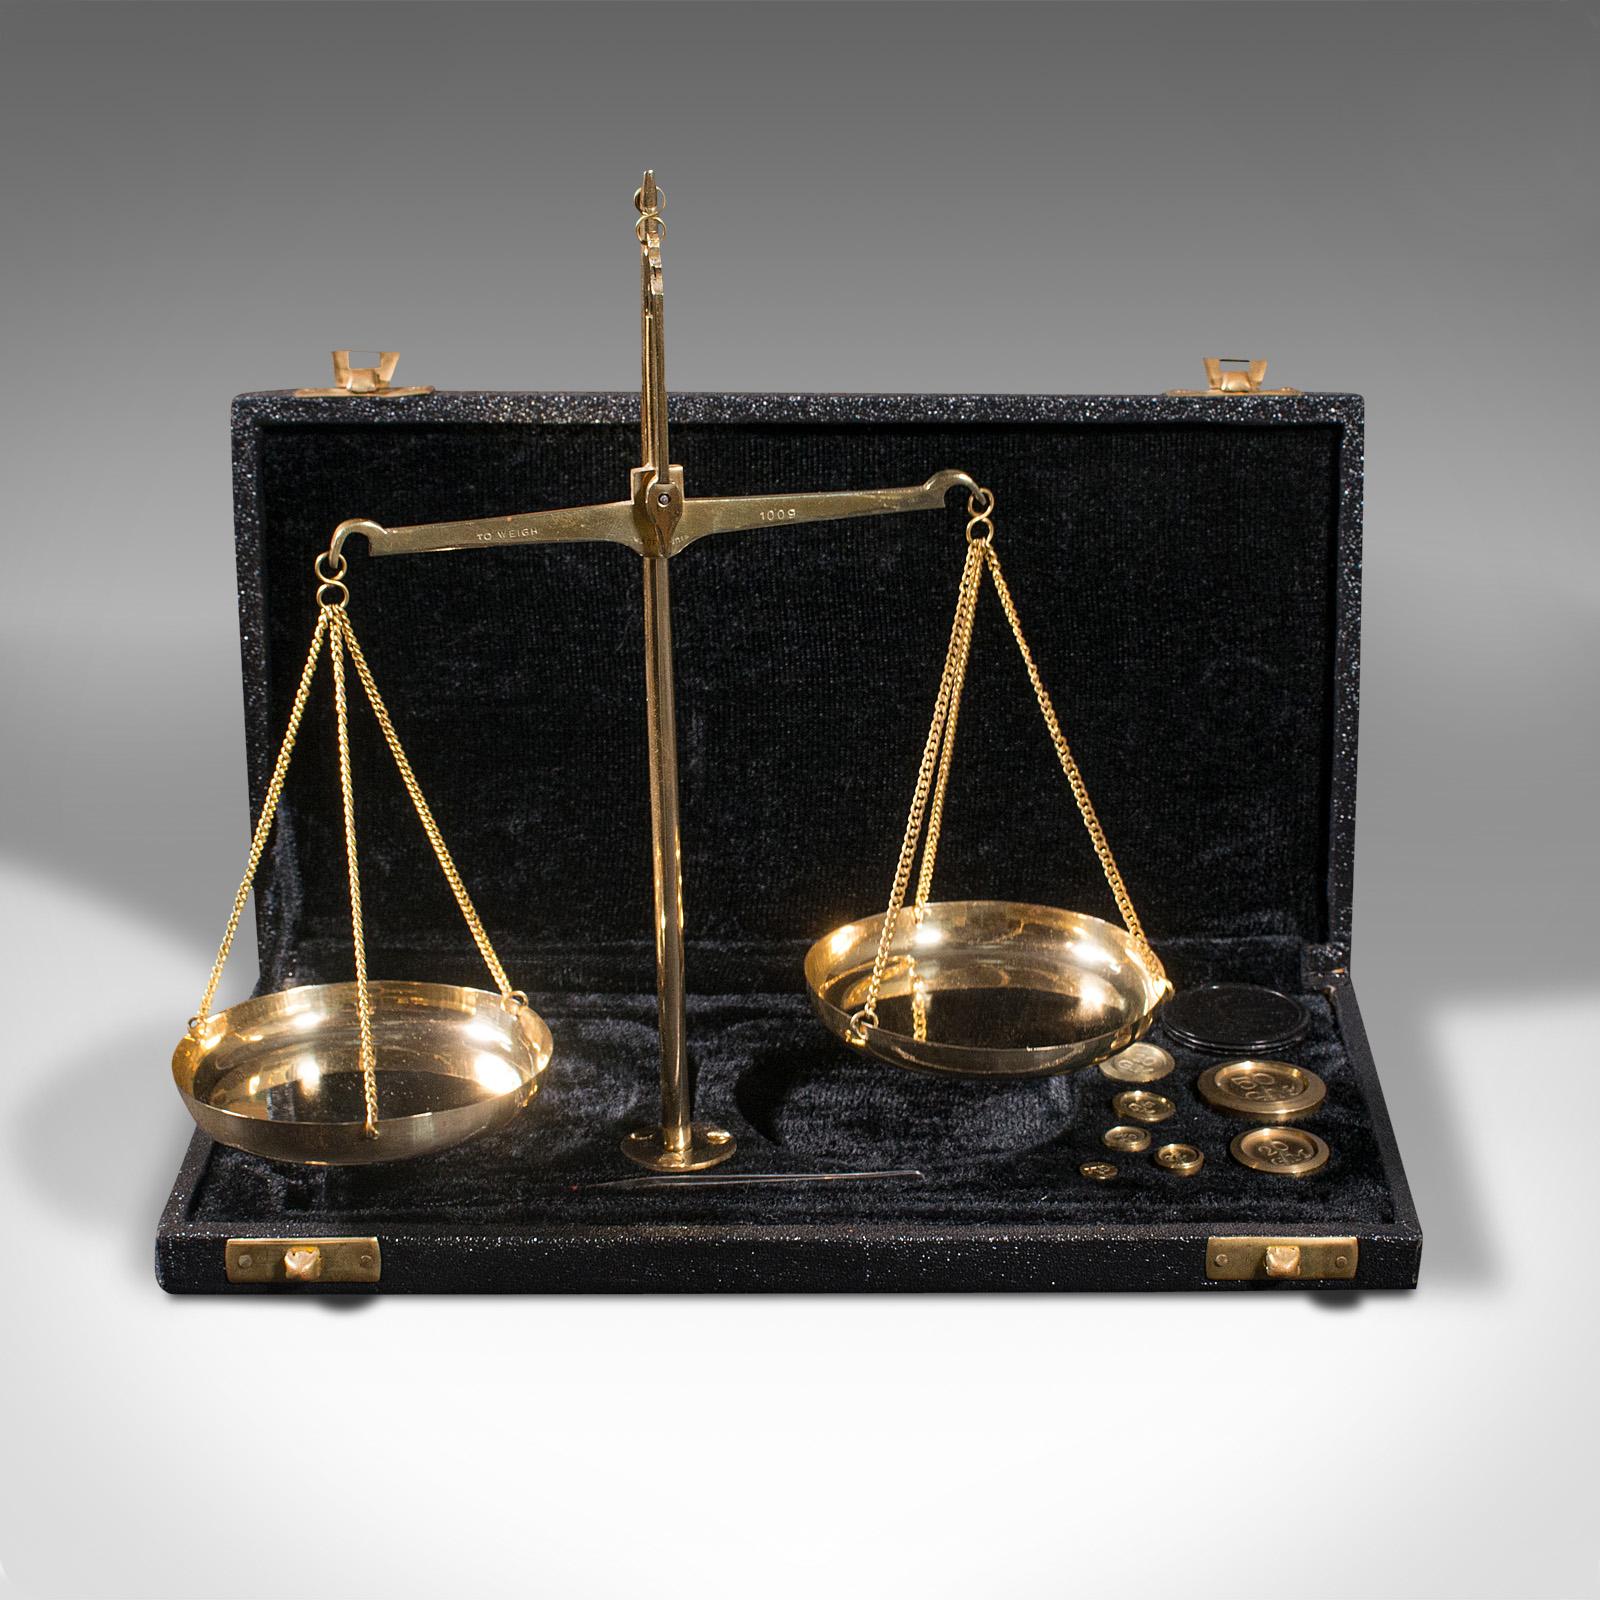 This is a vintage cased balance scale. An Indian, brass apothecary measure, dating to the mid 20th century, circa 1960.

Compact and portable, ideal for the desk or in the field
Displays a desirable aged patina throughout
Polished brass scale